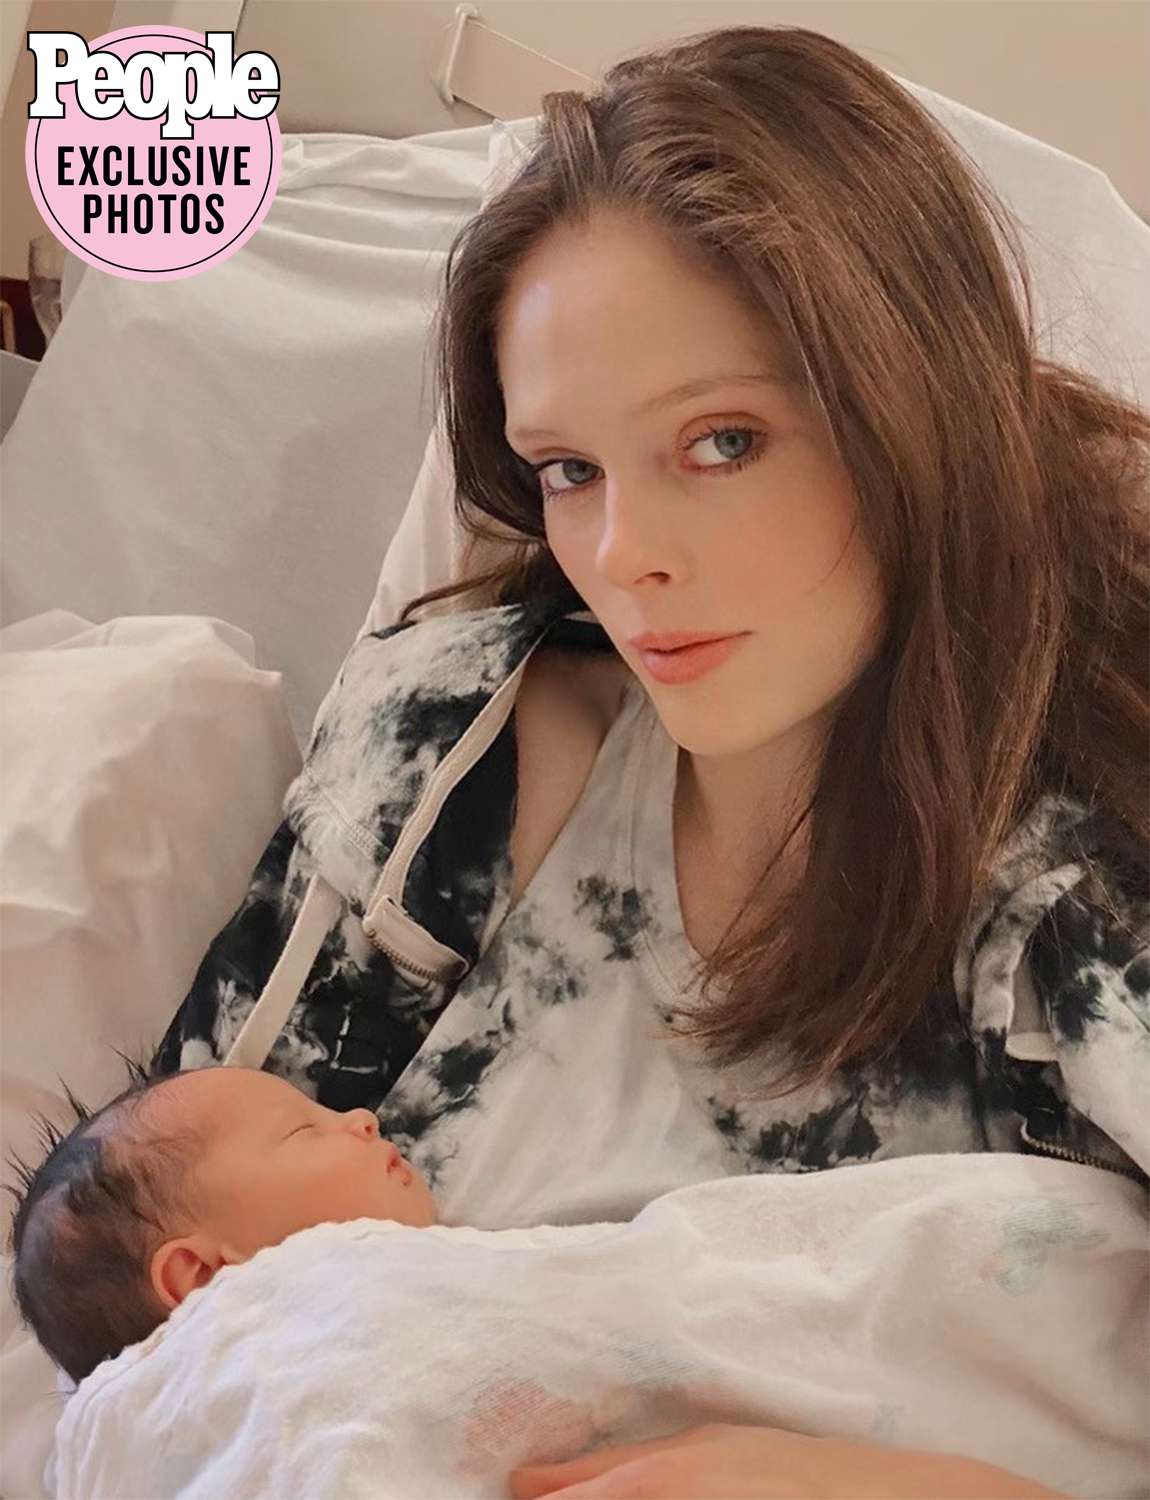 <p>Model Coco Rocha and her husband James Conran welcomed their third child together, a baby girl named Iley Ryn Conran, a rep confirmed exclusively to PEOPLE. The new addition was born on Nov. 22, in New York, weighing 7 lbs., 10 oz.</p>
                            <p>The little one joines big brother Iver Eames, 2½, and big sister Ioni James, 5½.</p>
                            <p>"James and I are so thankful to have had a safe delivery and to finally bring baby Iley home to her big sister, Ioni, and big brother, Iver," says the new mother of three. "It was love at first sight for everyone, and we're all excited to bunker down and cuddle up as a family this winter."</p>
                            